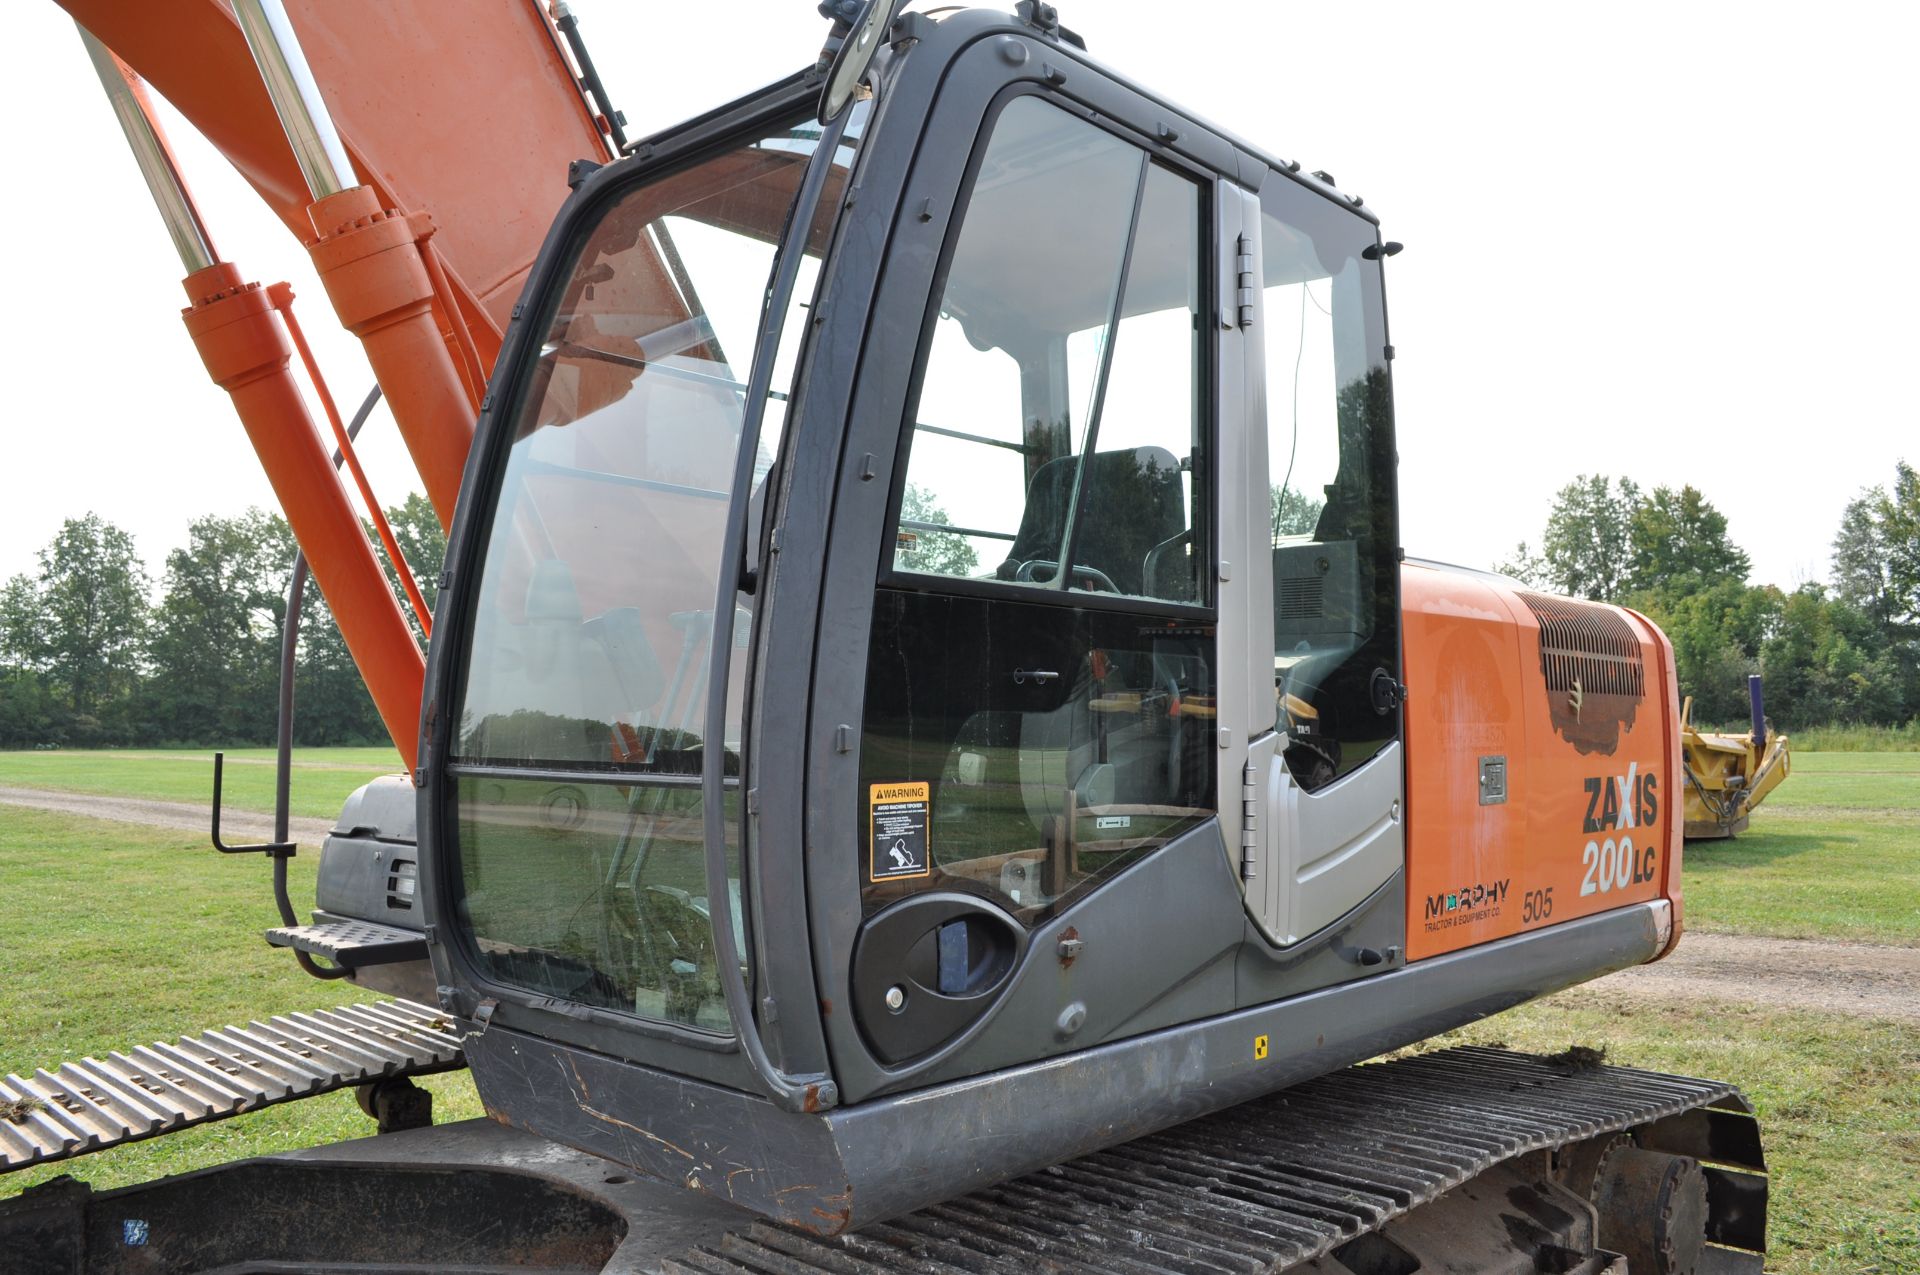 Hitachi ZX 200 LC-3 excavator, 32” steel pads, C/H/A, 72” smooth bucket, hyd coupler, aux boom hyd - Image 20 of 34